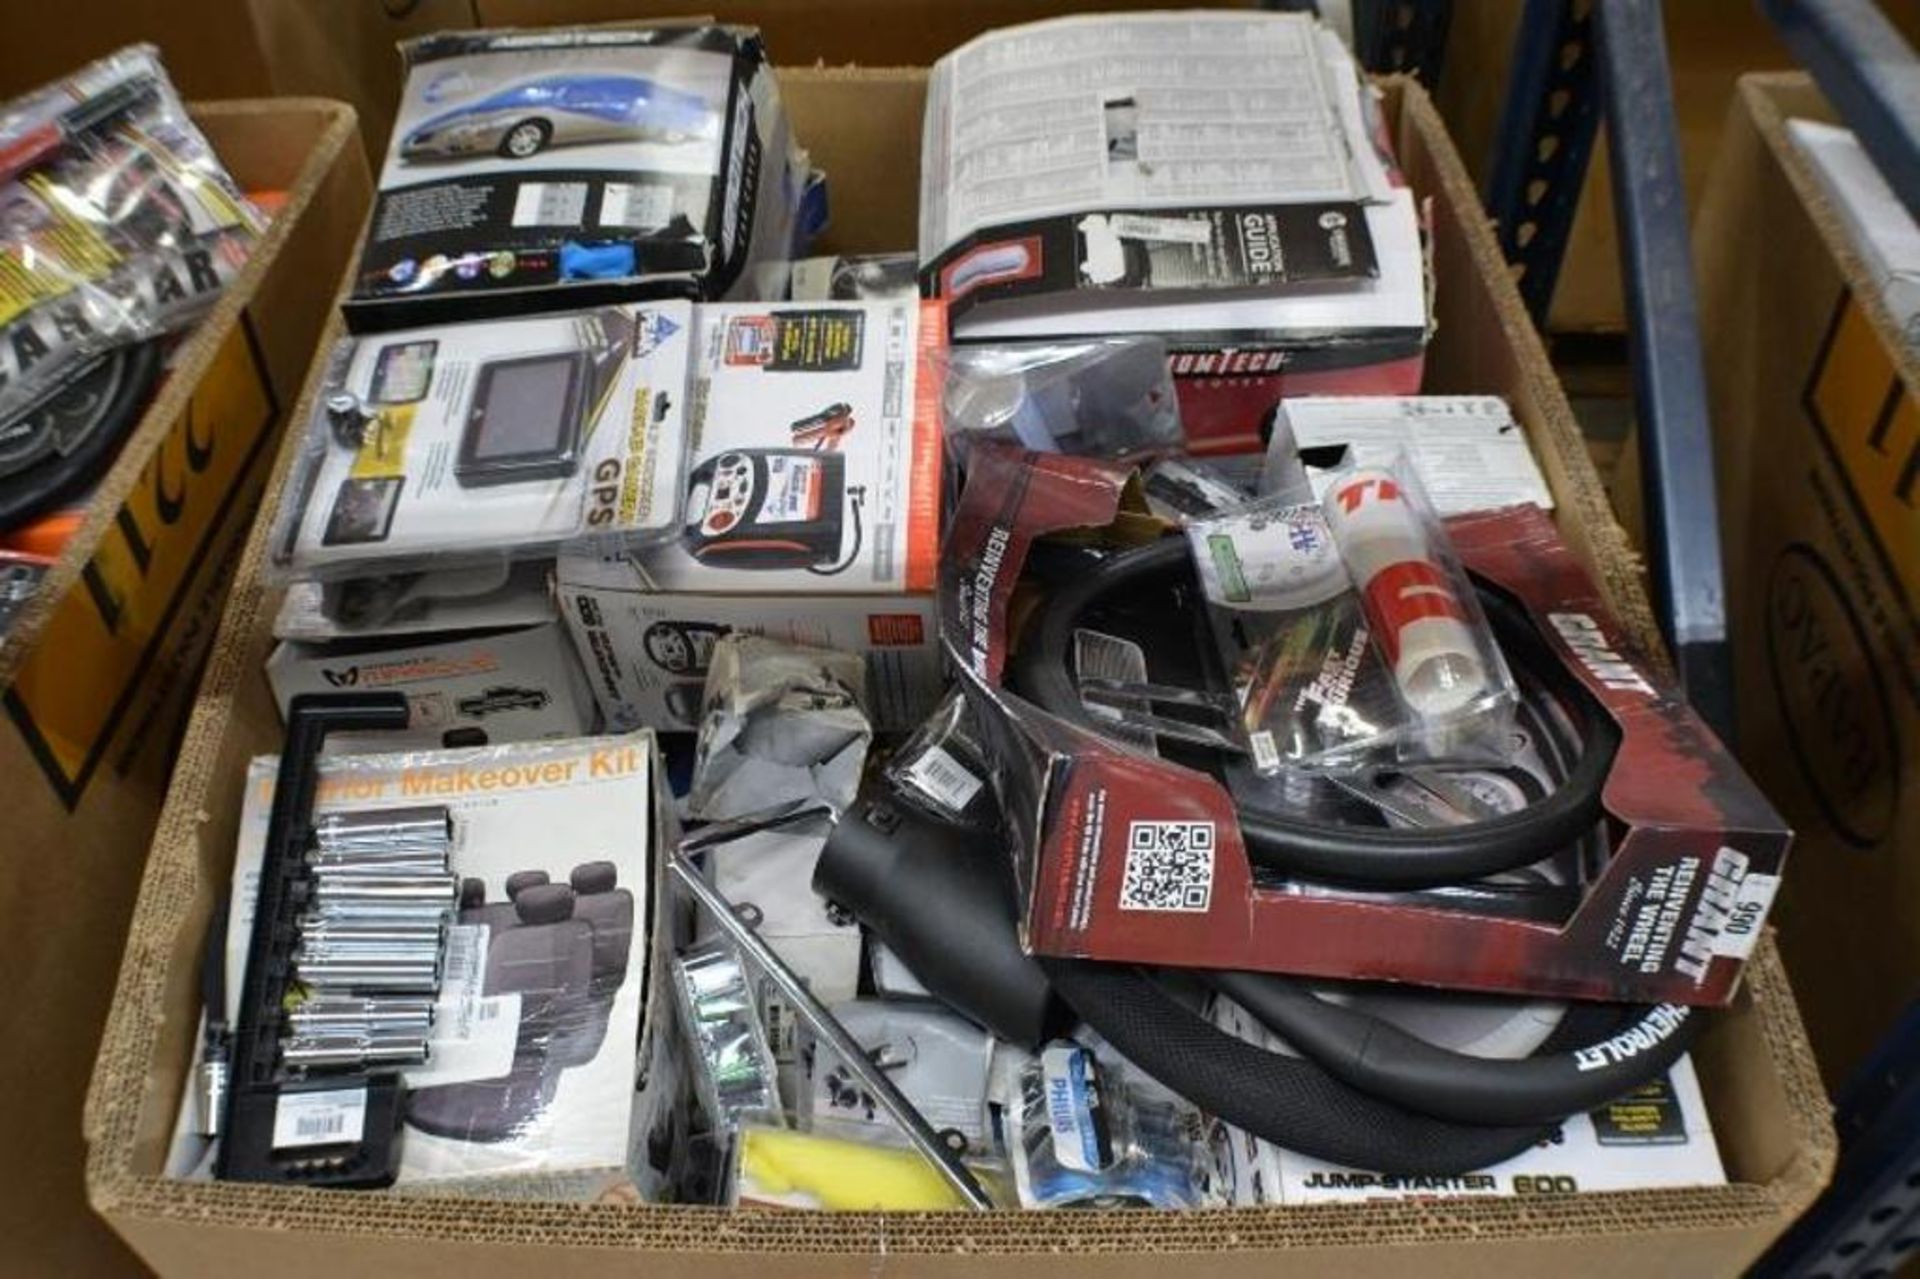 Car Accessories + Automobile Parts. Assorted Auto Parts + Interior Makeover Kit + Jump Starter + Ste